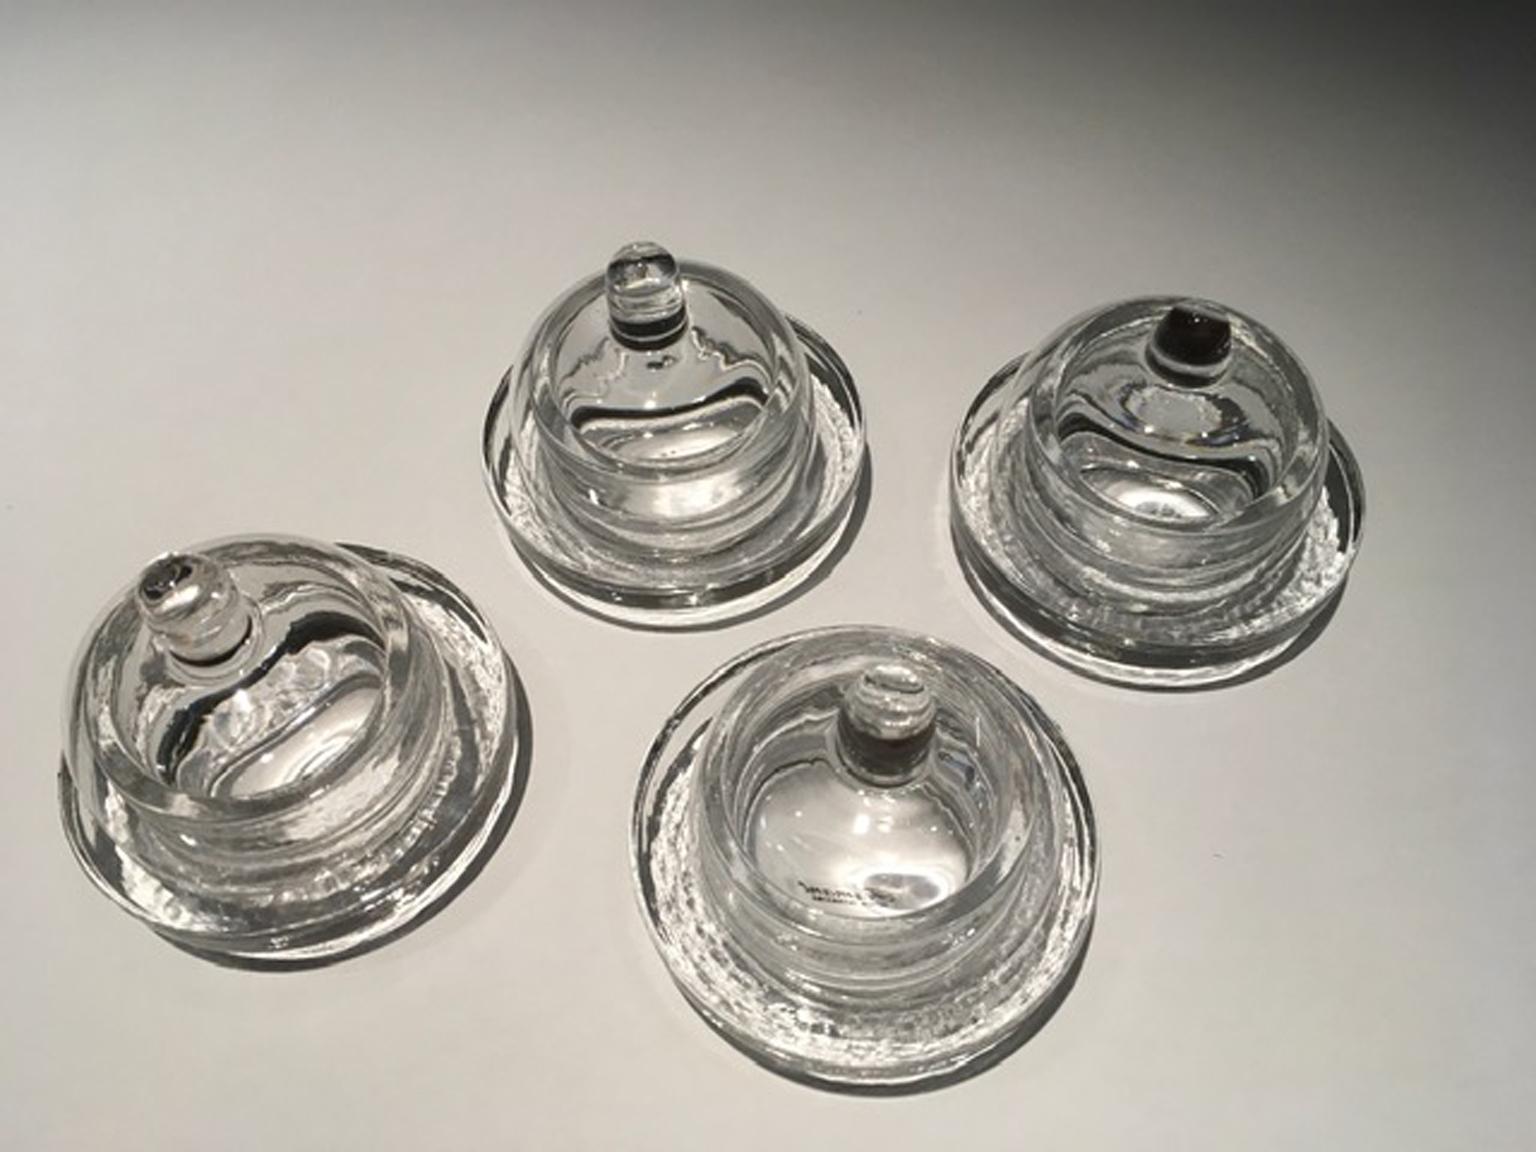 Italian Italy Set of 4 Covered Glass Butter Dishes